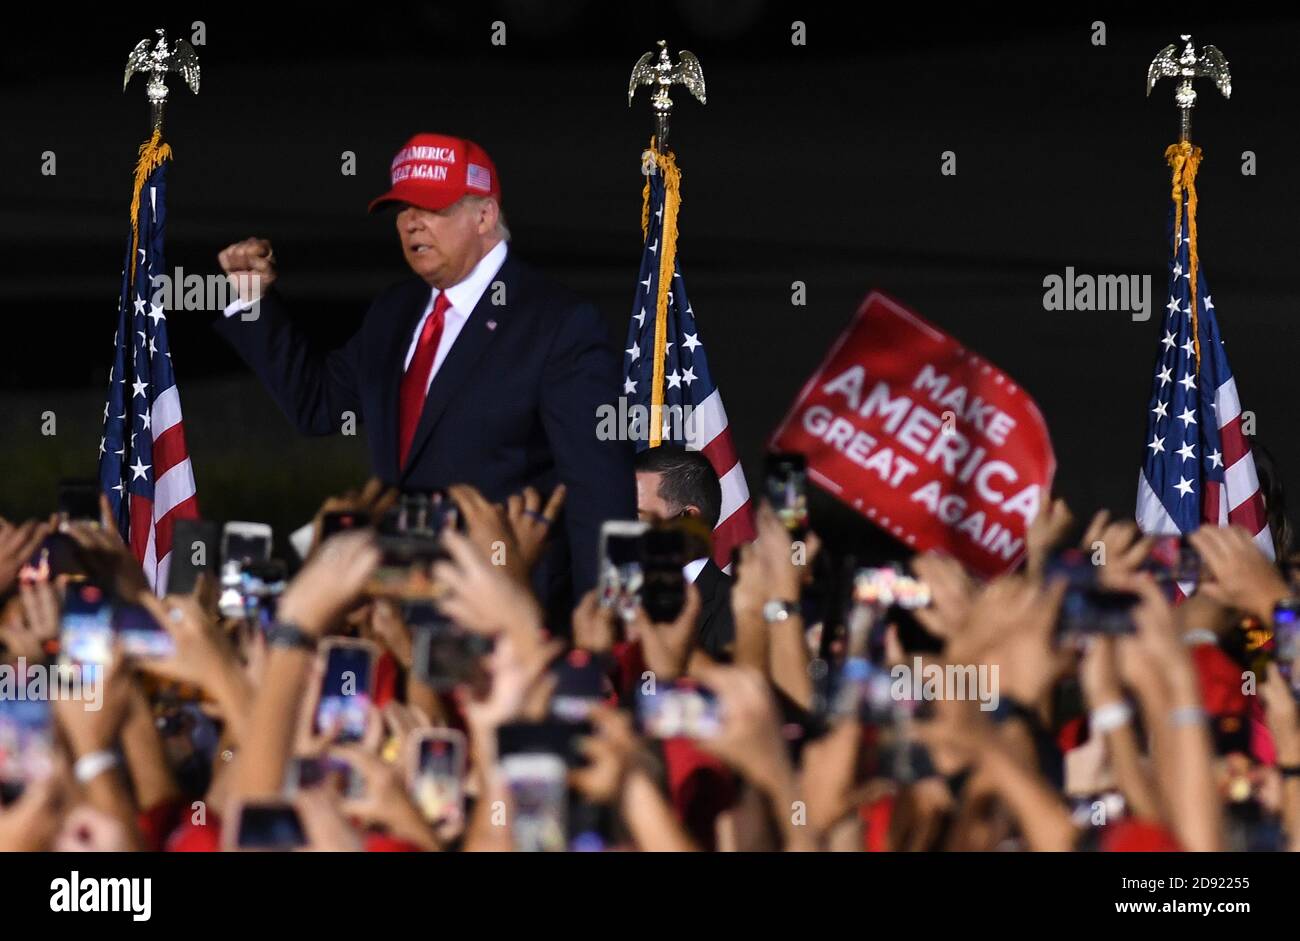 Opa Locka, United States. 01st Nov, 2020. November 1, 2020 - Opa-Locka, Florida, United States - U.S. President Donald Trump greets supporters as he arrives to speak at a campaign rally at Miami-Opa Locka Executive Airport on November 1, 2020 in Opa-Locka, Florida. President Trump held events in five states today, as he continues his campaign against Democratic presidential nominee Joe Biden two days before the November 3 election. Credit: Paul Hennessy/Alamy Live News Stock Photo